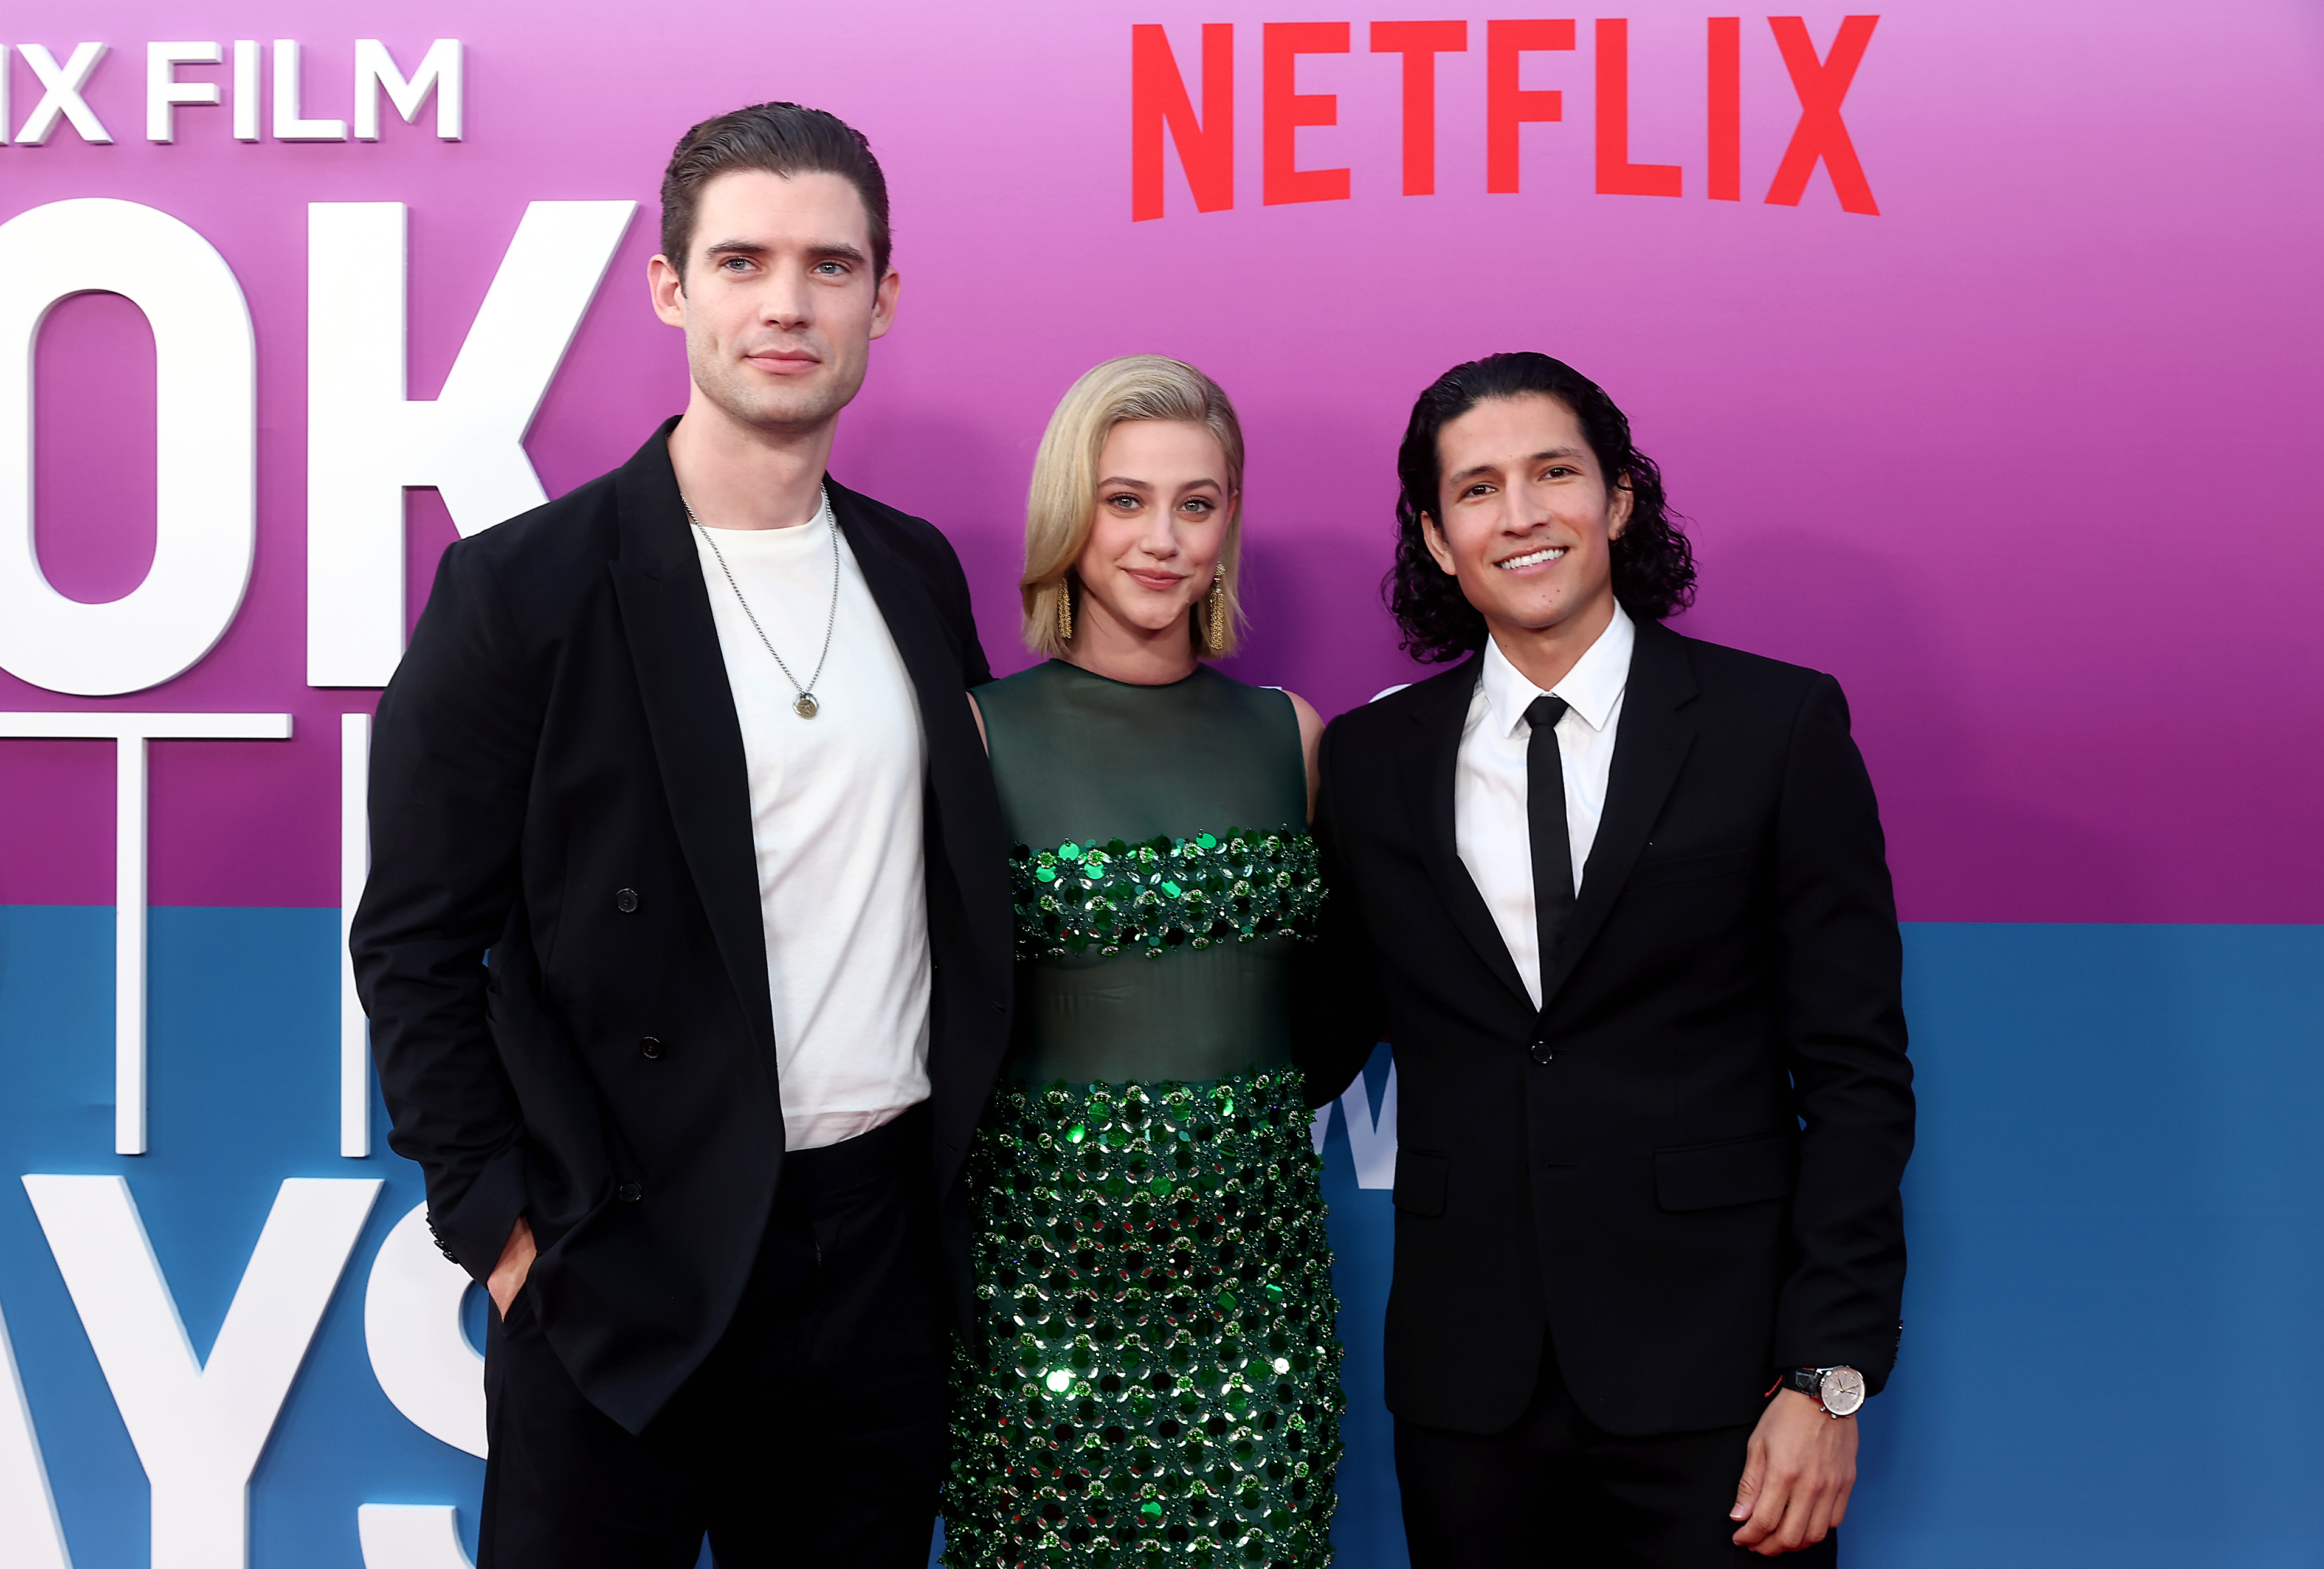 David towering over Lili and Danny on the red carpet